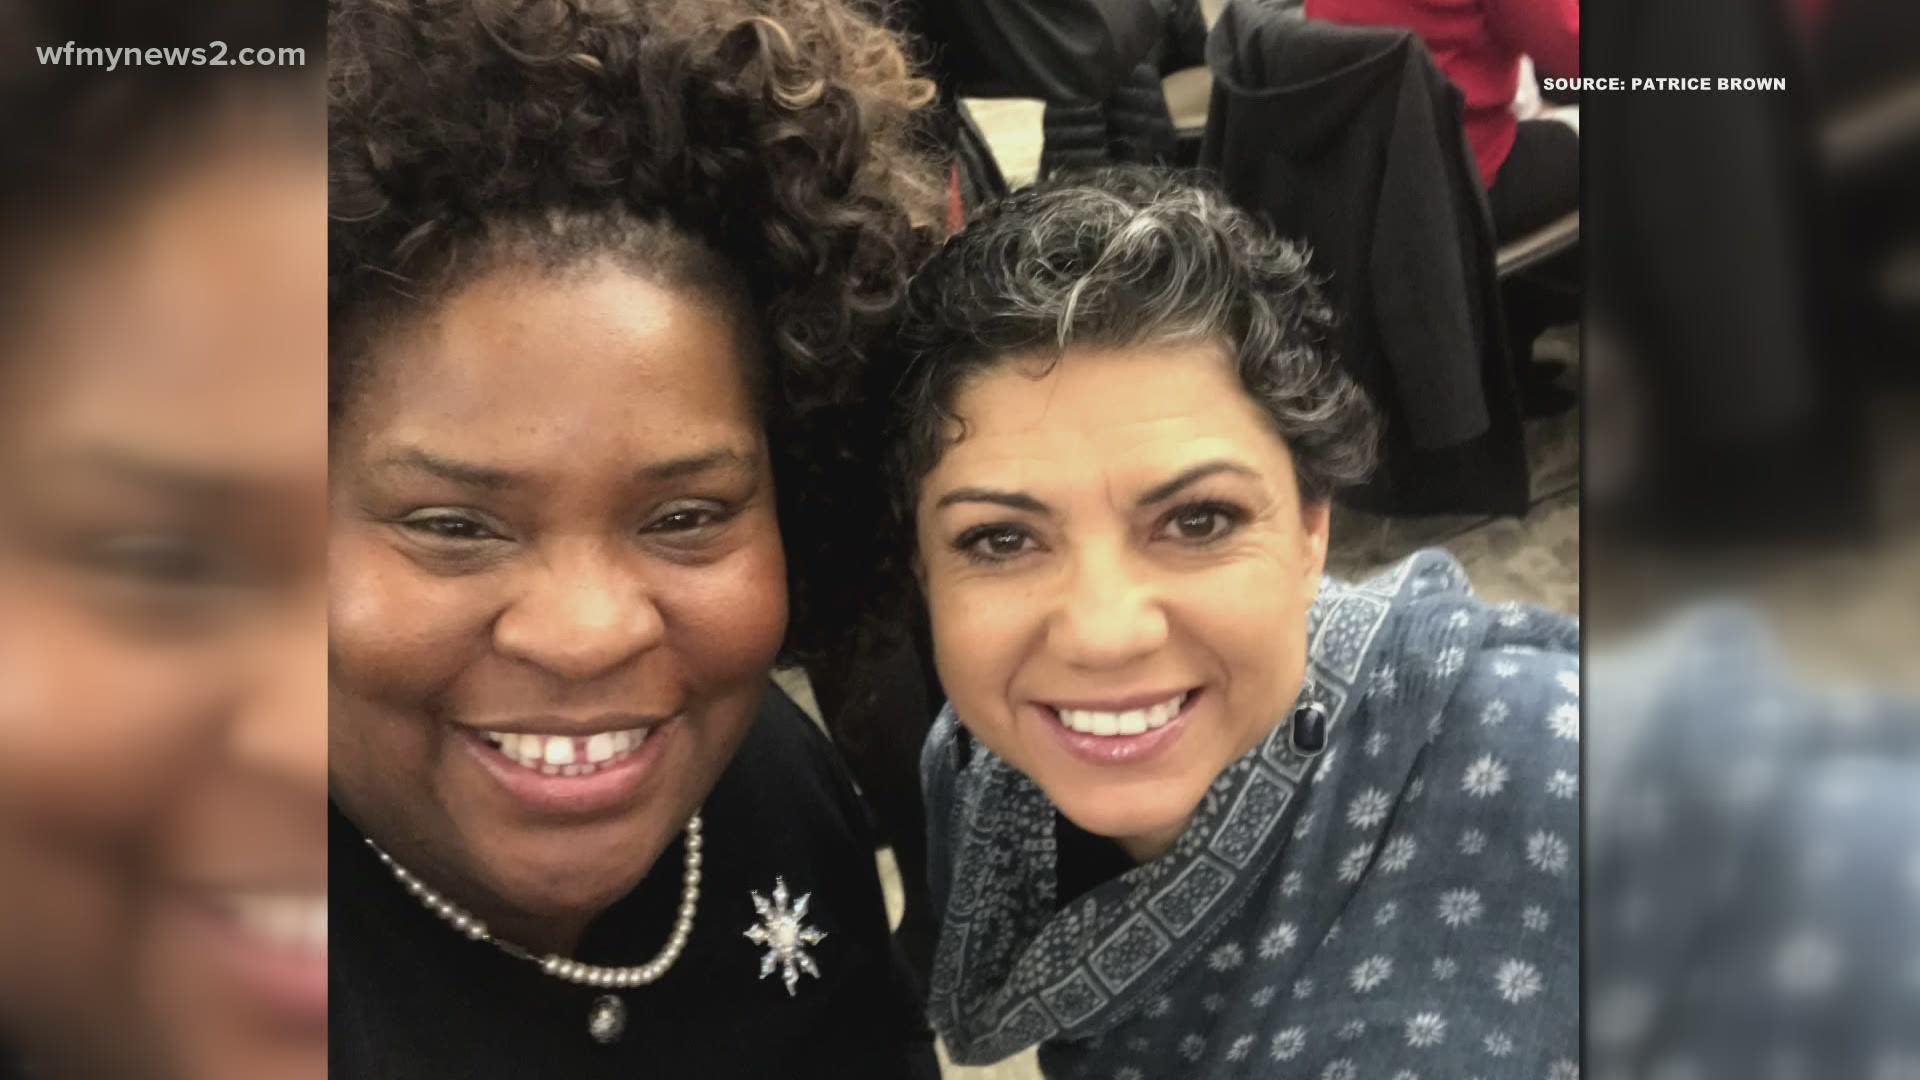 Two Guilford County Schools principals formed a special bond when they first met. A phone call to catch up with an old friend led to a life-saving miracle.